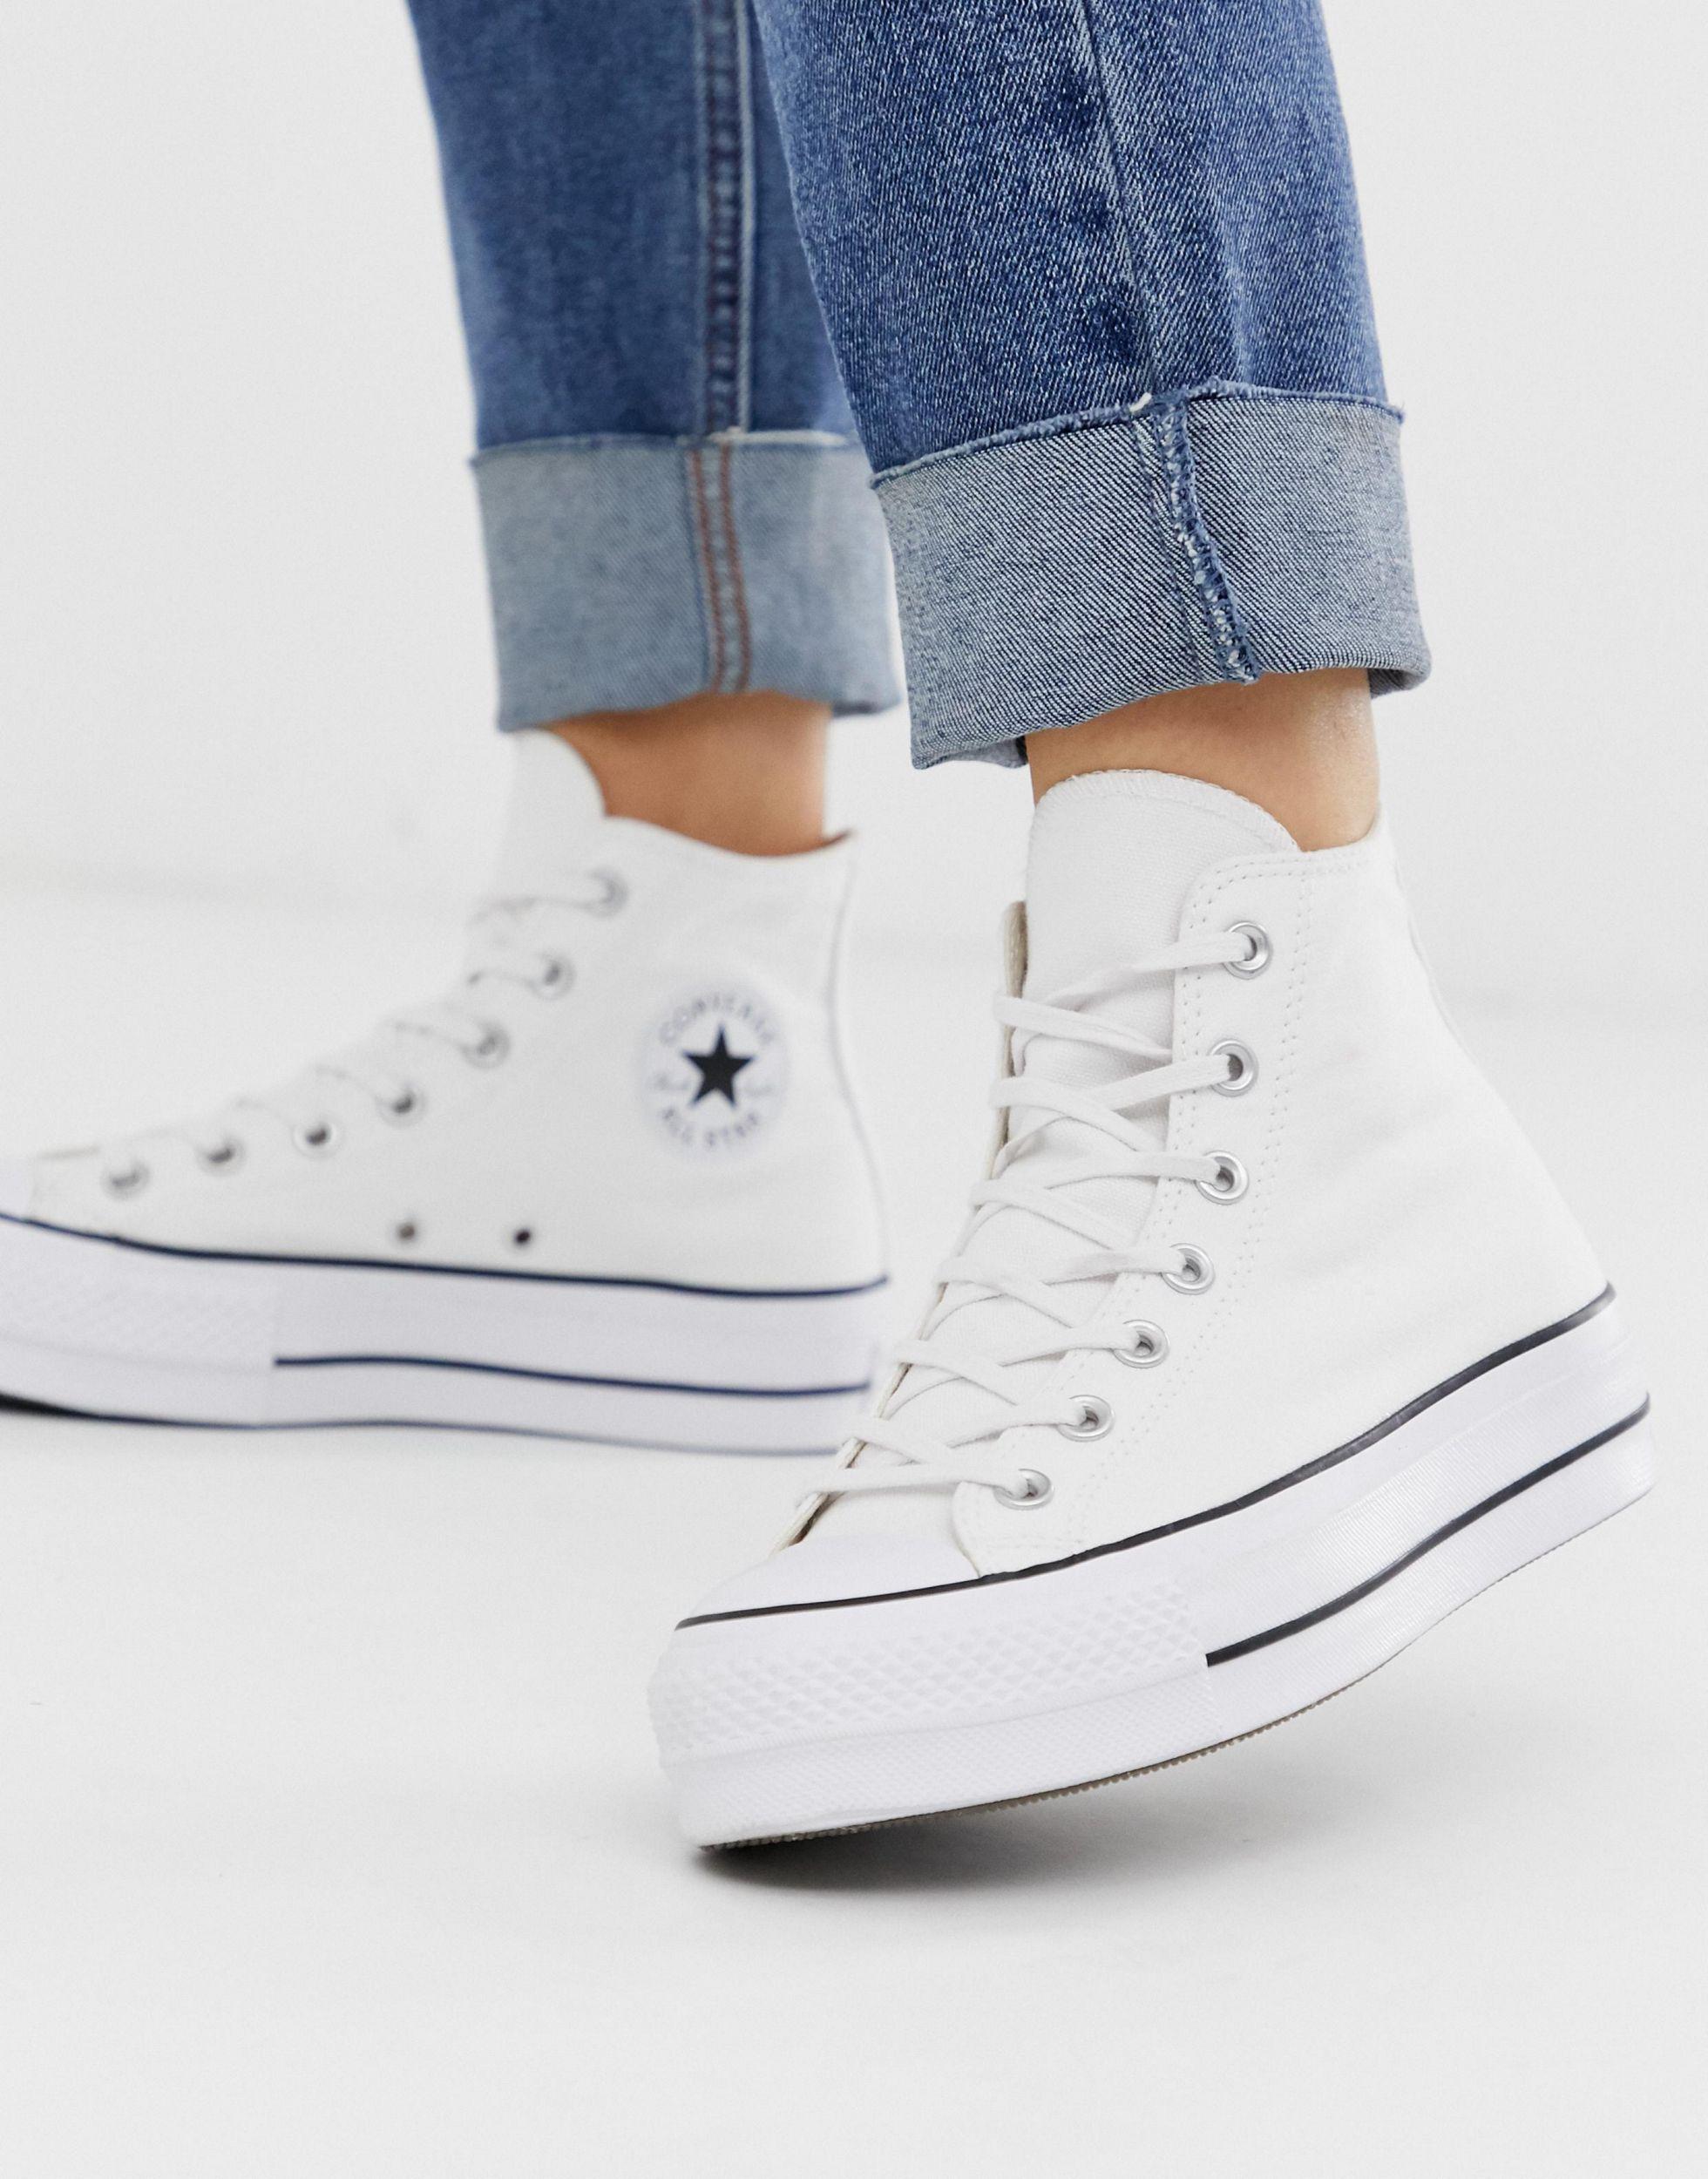 Converse Chuck Taylor All Star Hi Lift Sneakers in White | Lyst مرطب العين